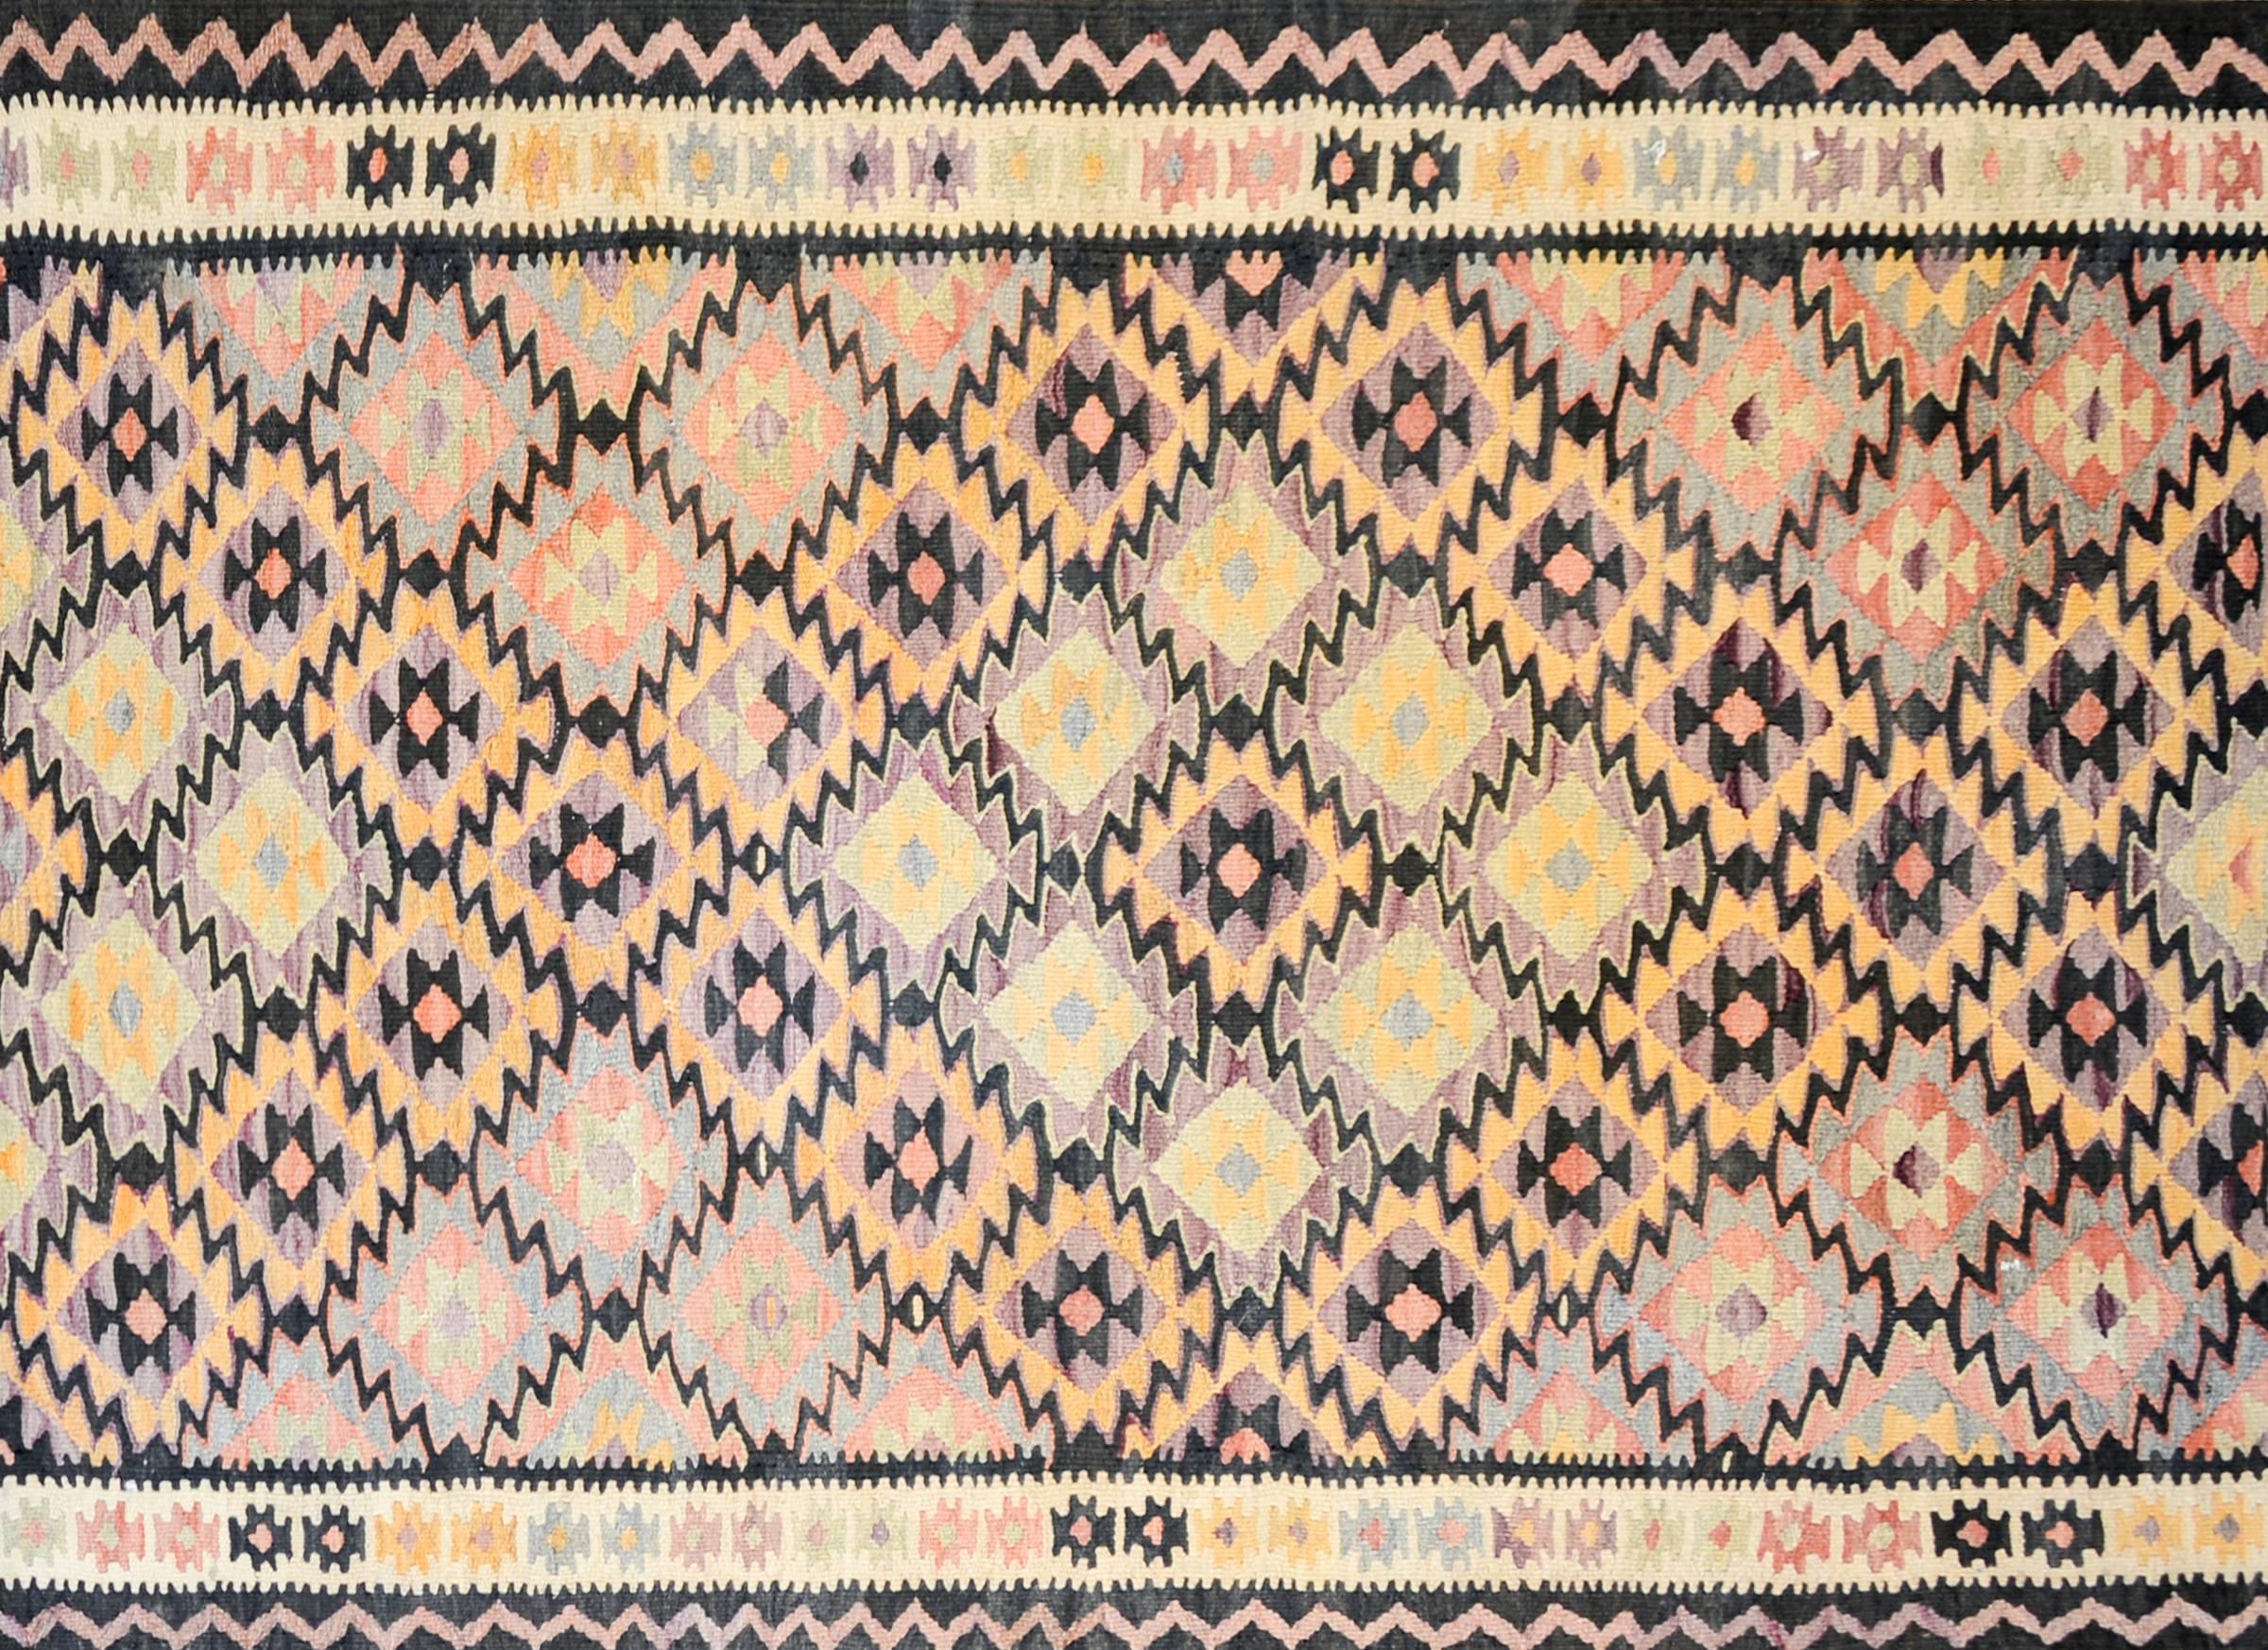 An amazing mid-20th century Persian Qazvin Kilim runner with an multi-colored diamond pattern woven in such a way that a larger diamond pattern of orange, lilac, black and natural wool colored diamonds is created. The border is complex, with two